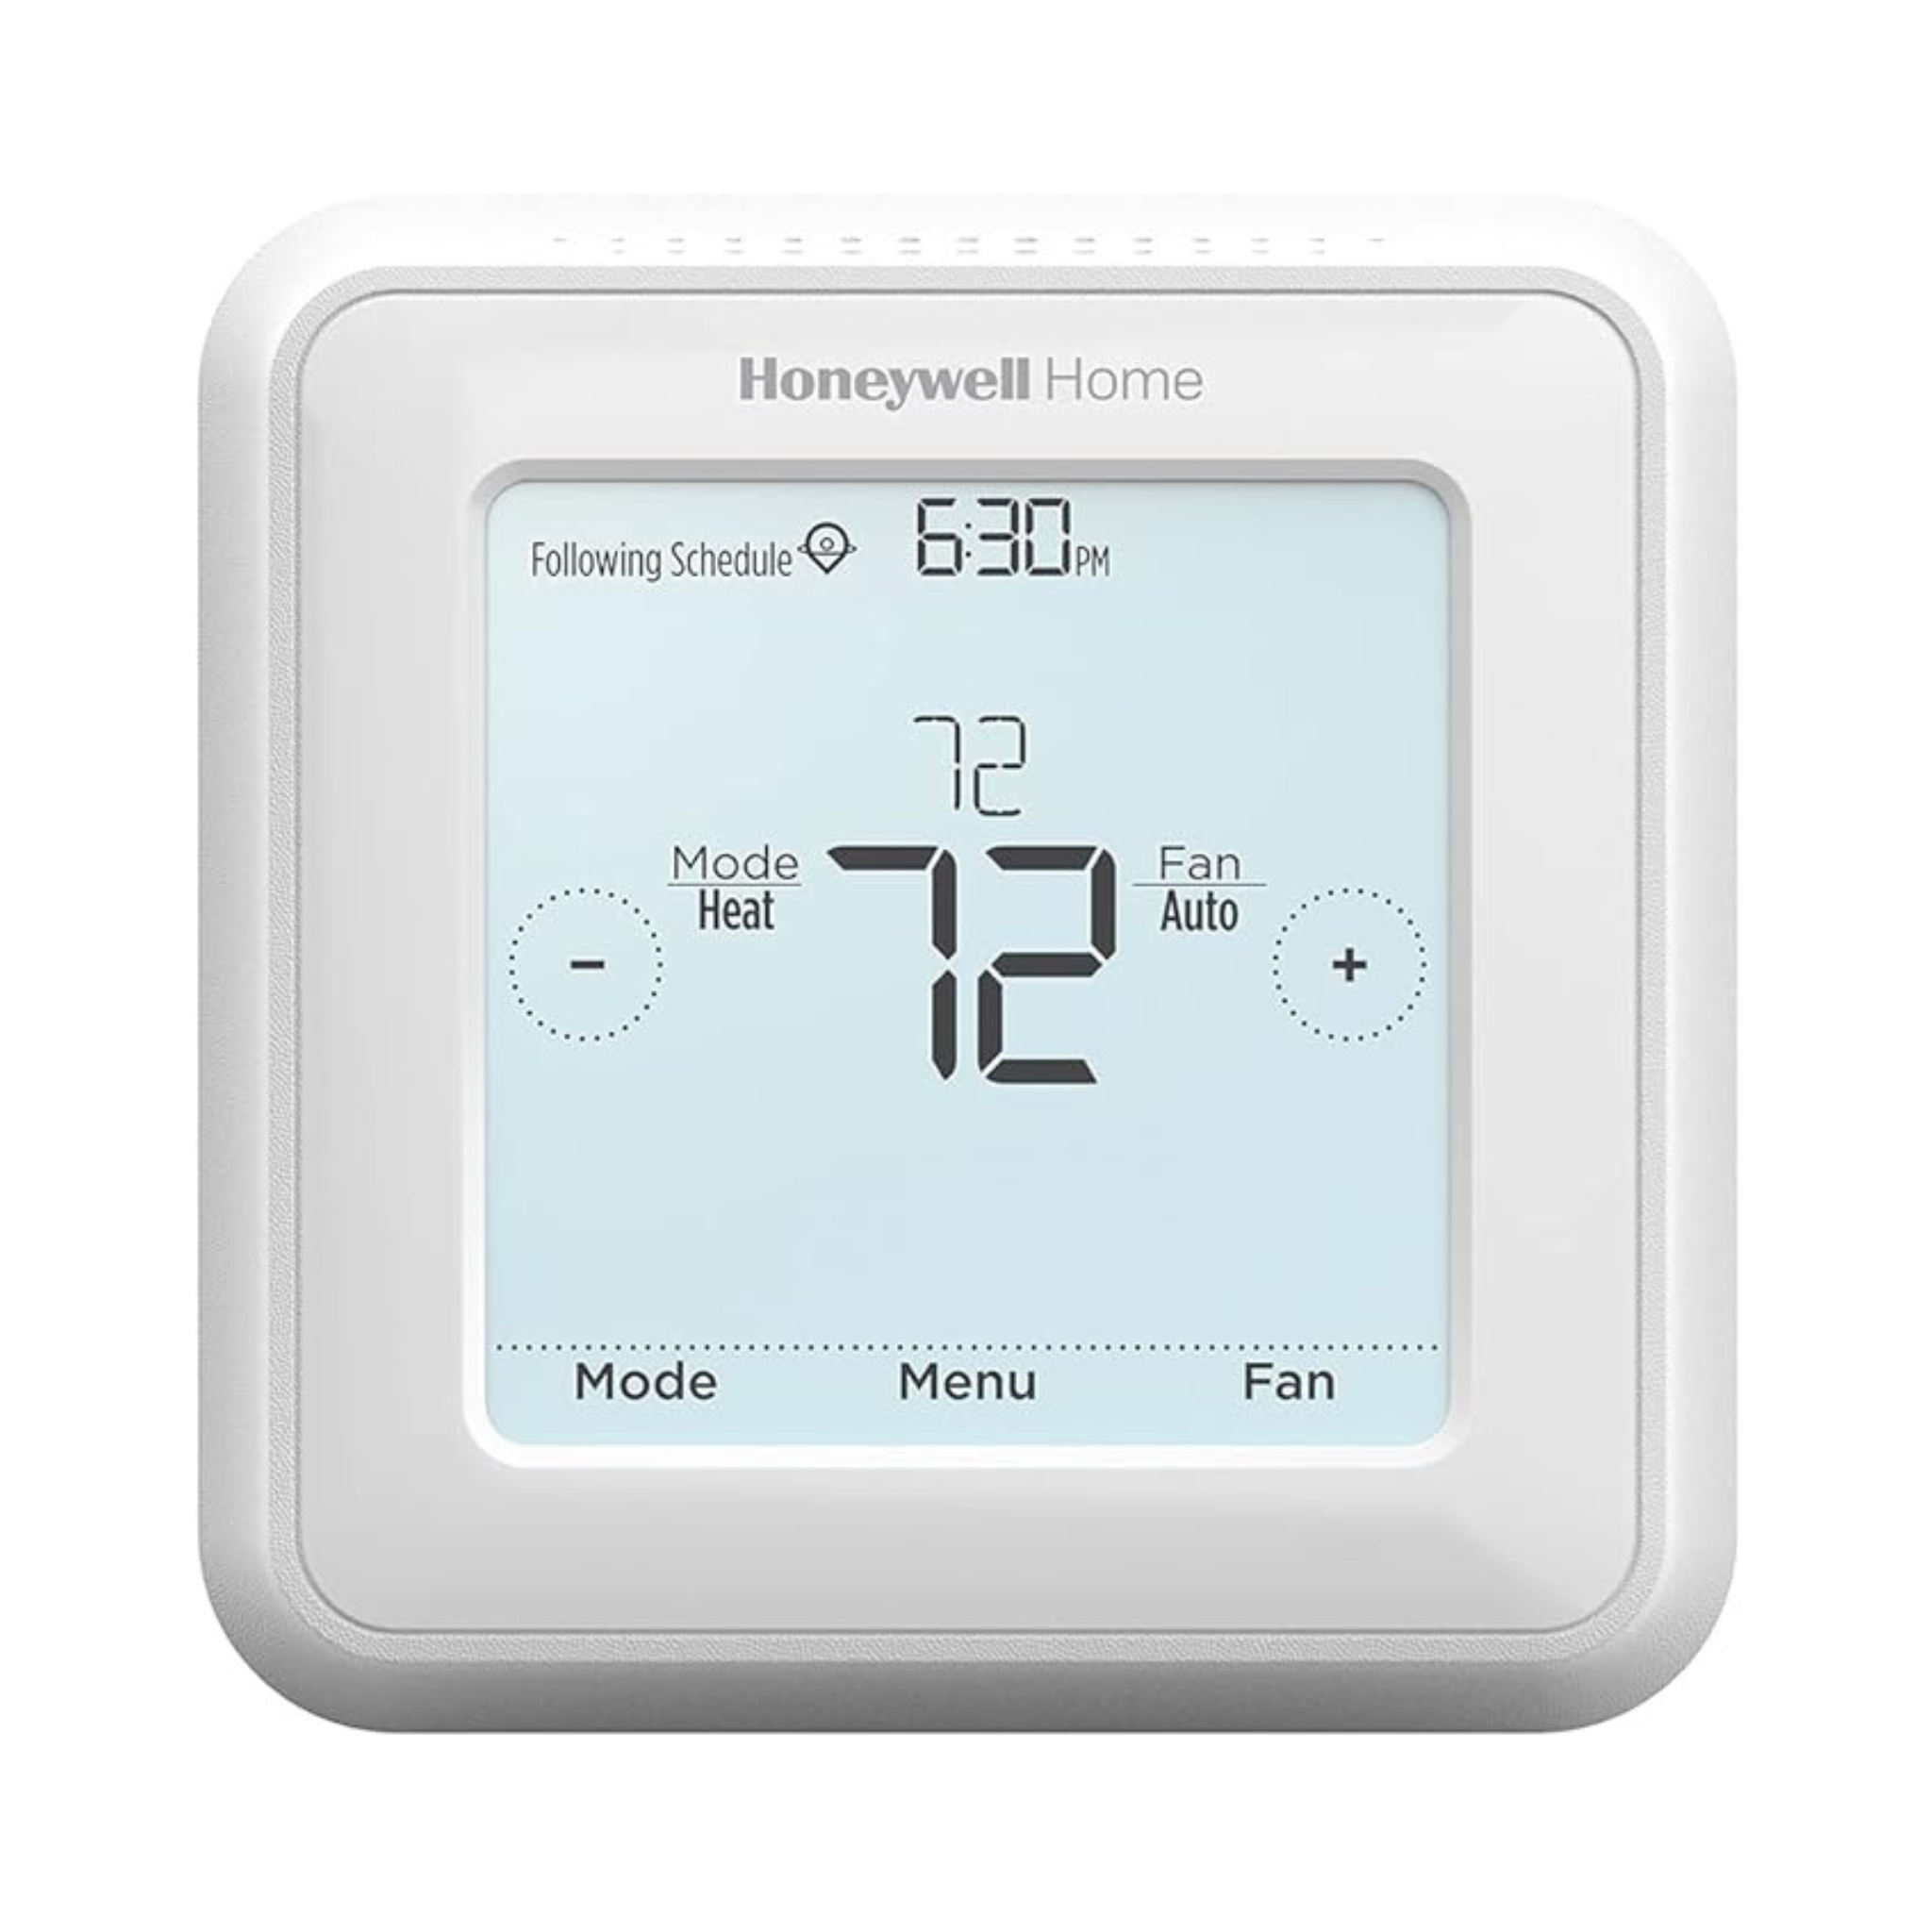 Honeywell Home 7 Day Programmable Touchscreen Thermostat